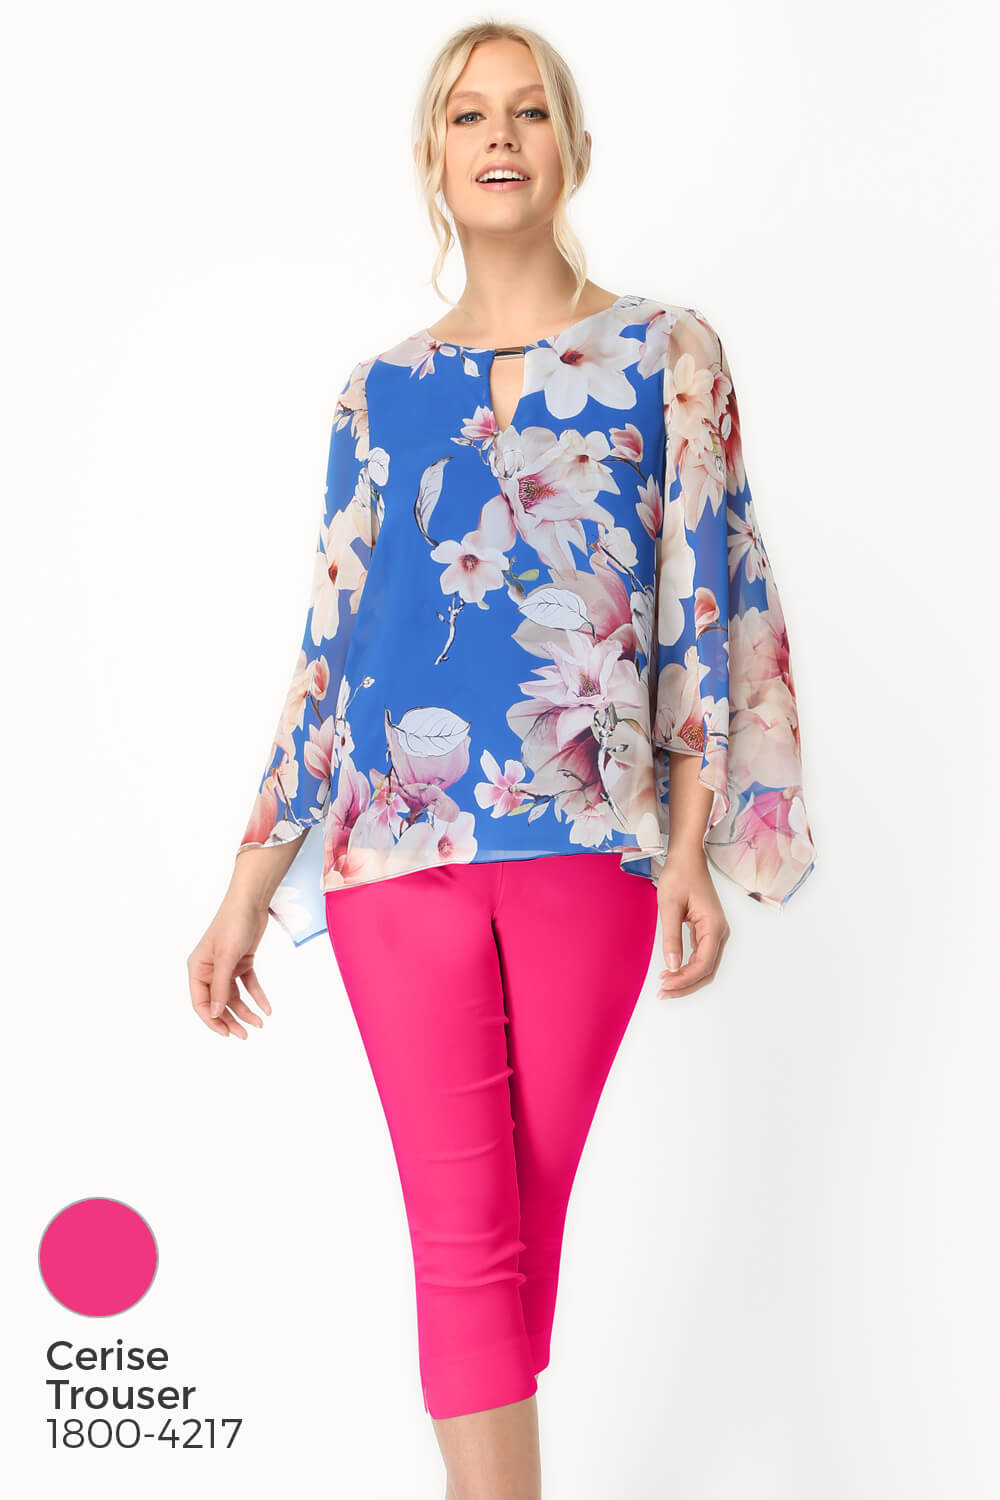 Royal Blue Floral Chiffon Overlay Top, Image 6 of 8